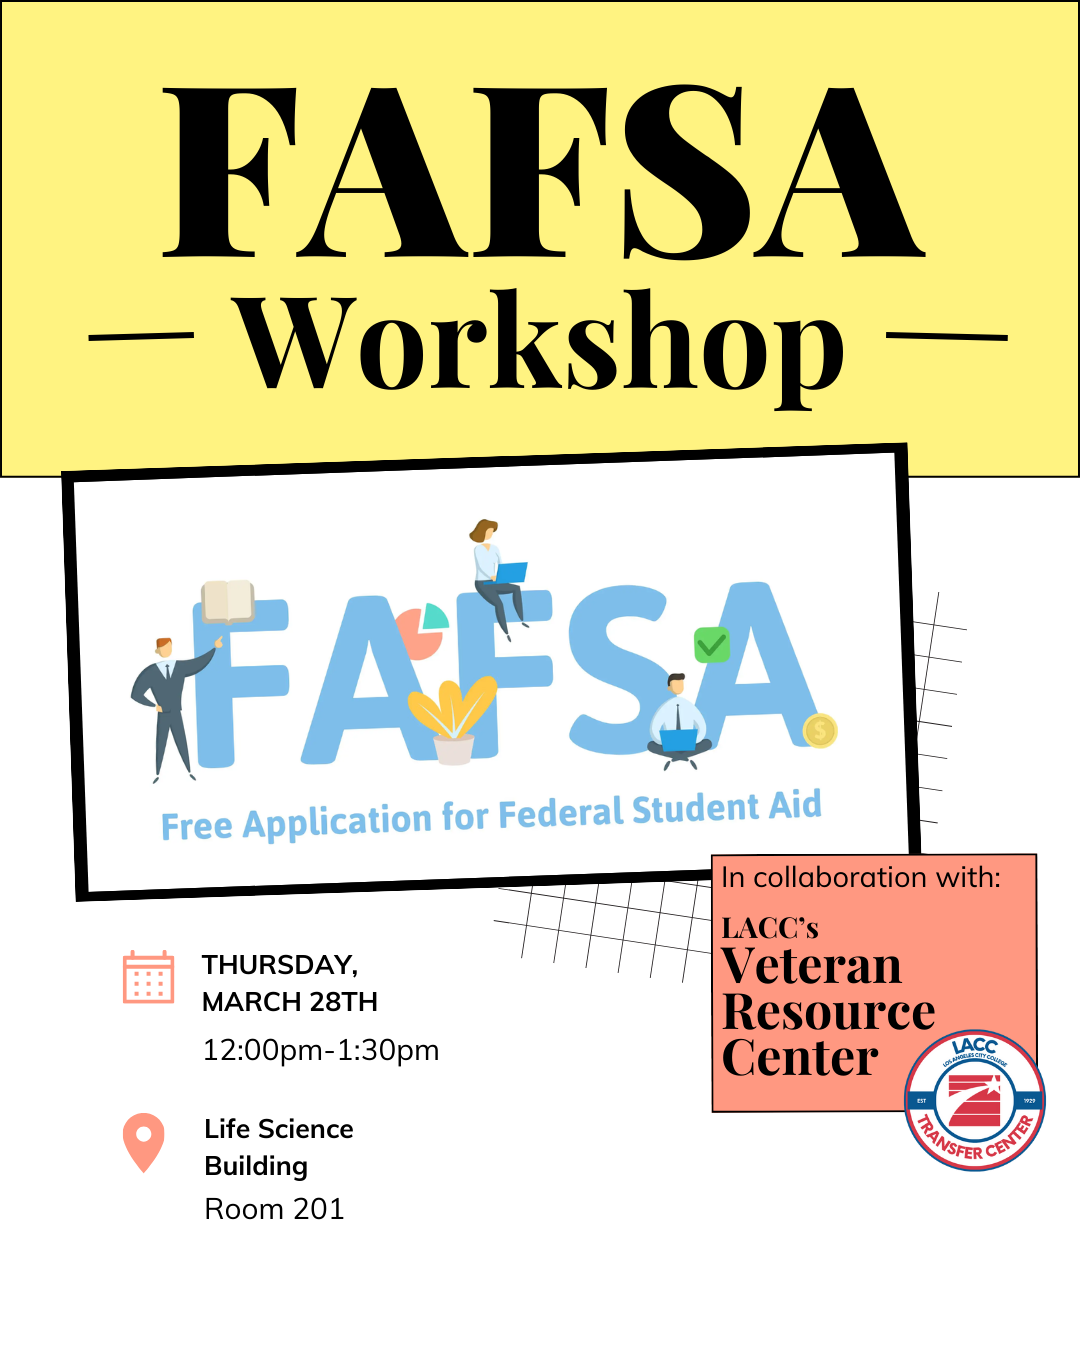 Flyer of FAFSA Workshop happening Thursday, March 28th @ 12:00pm-1:30pm